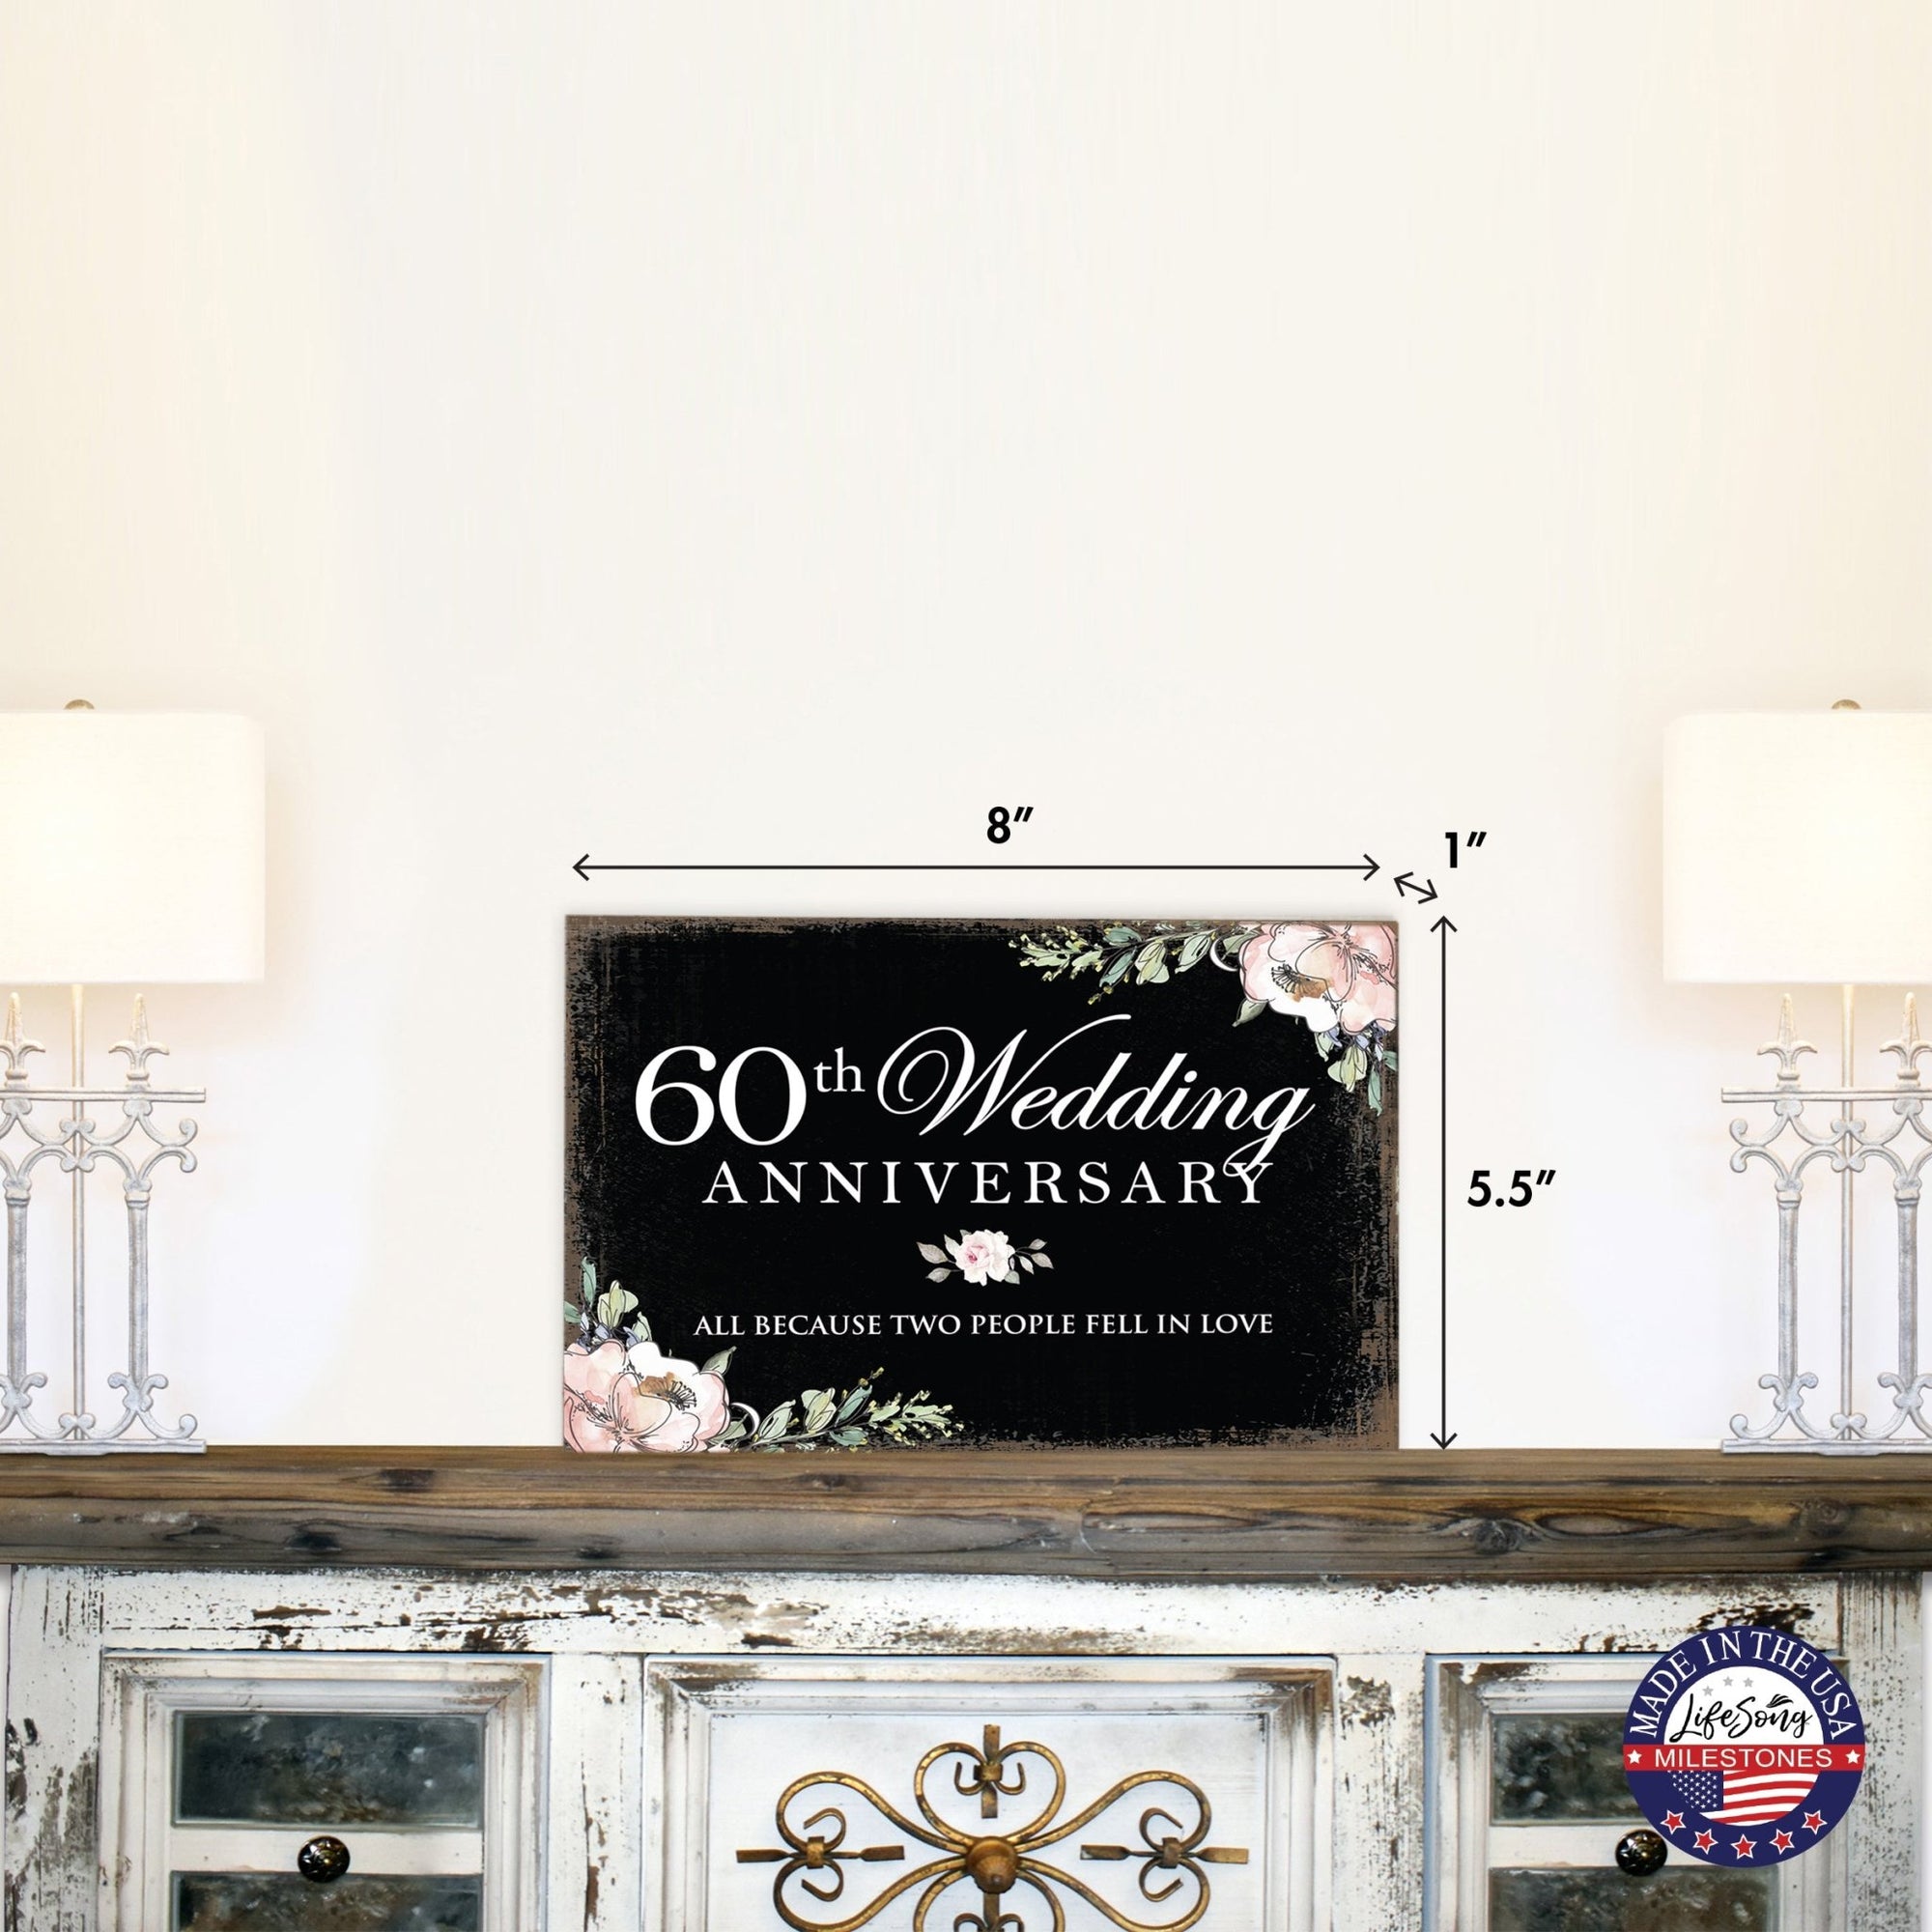 60th Wedding Anniversary Unique Shelf Decor and Tabletop Signs Gift for Couples - Fell In Love - LifeSong Milestones